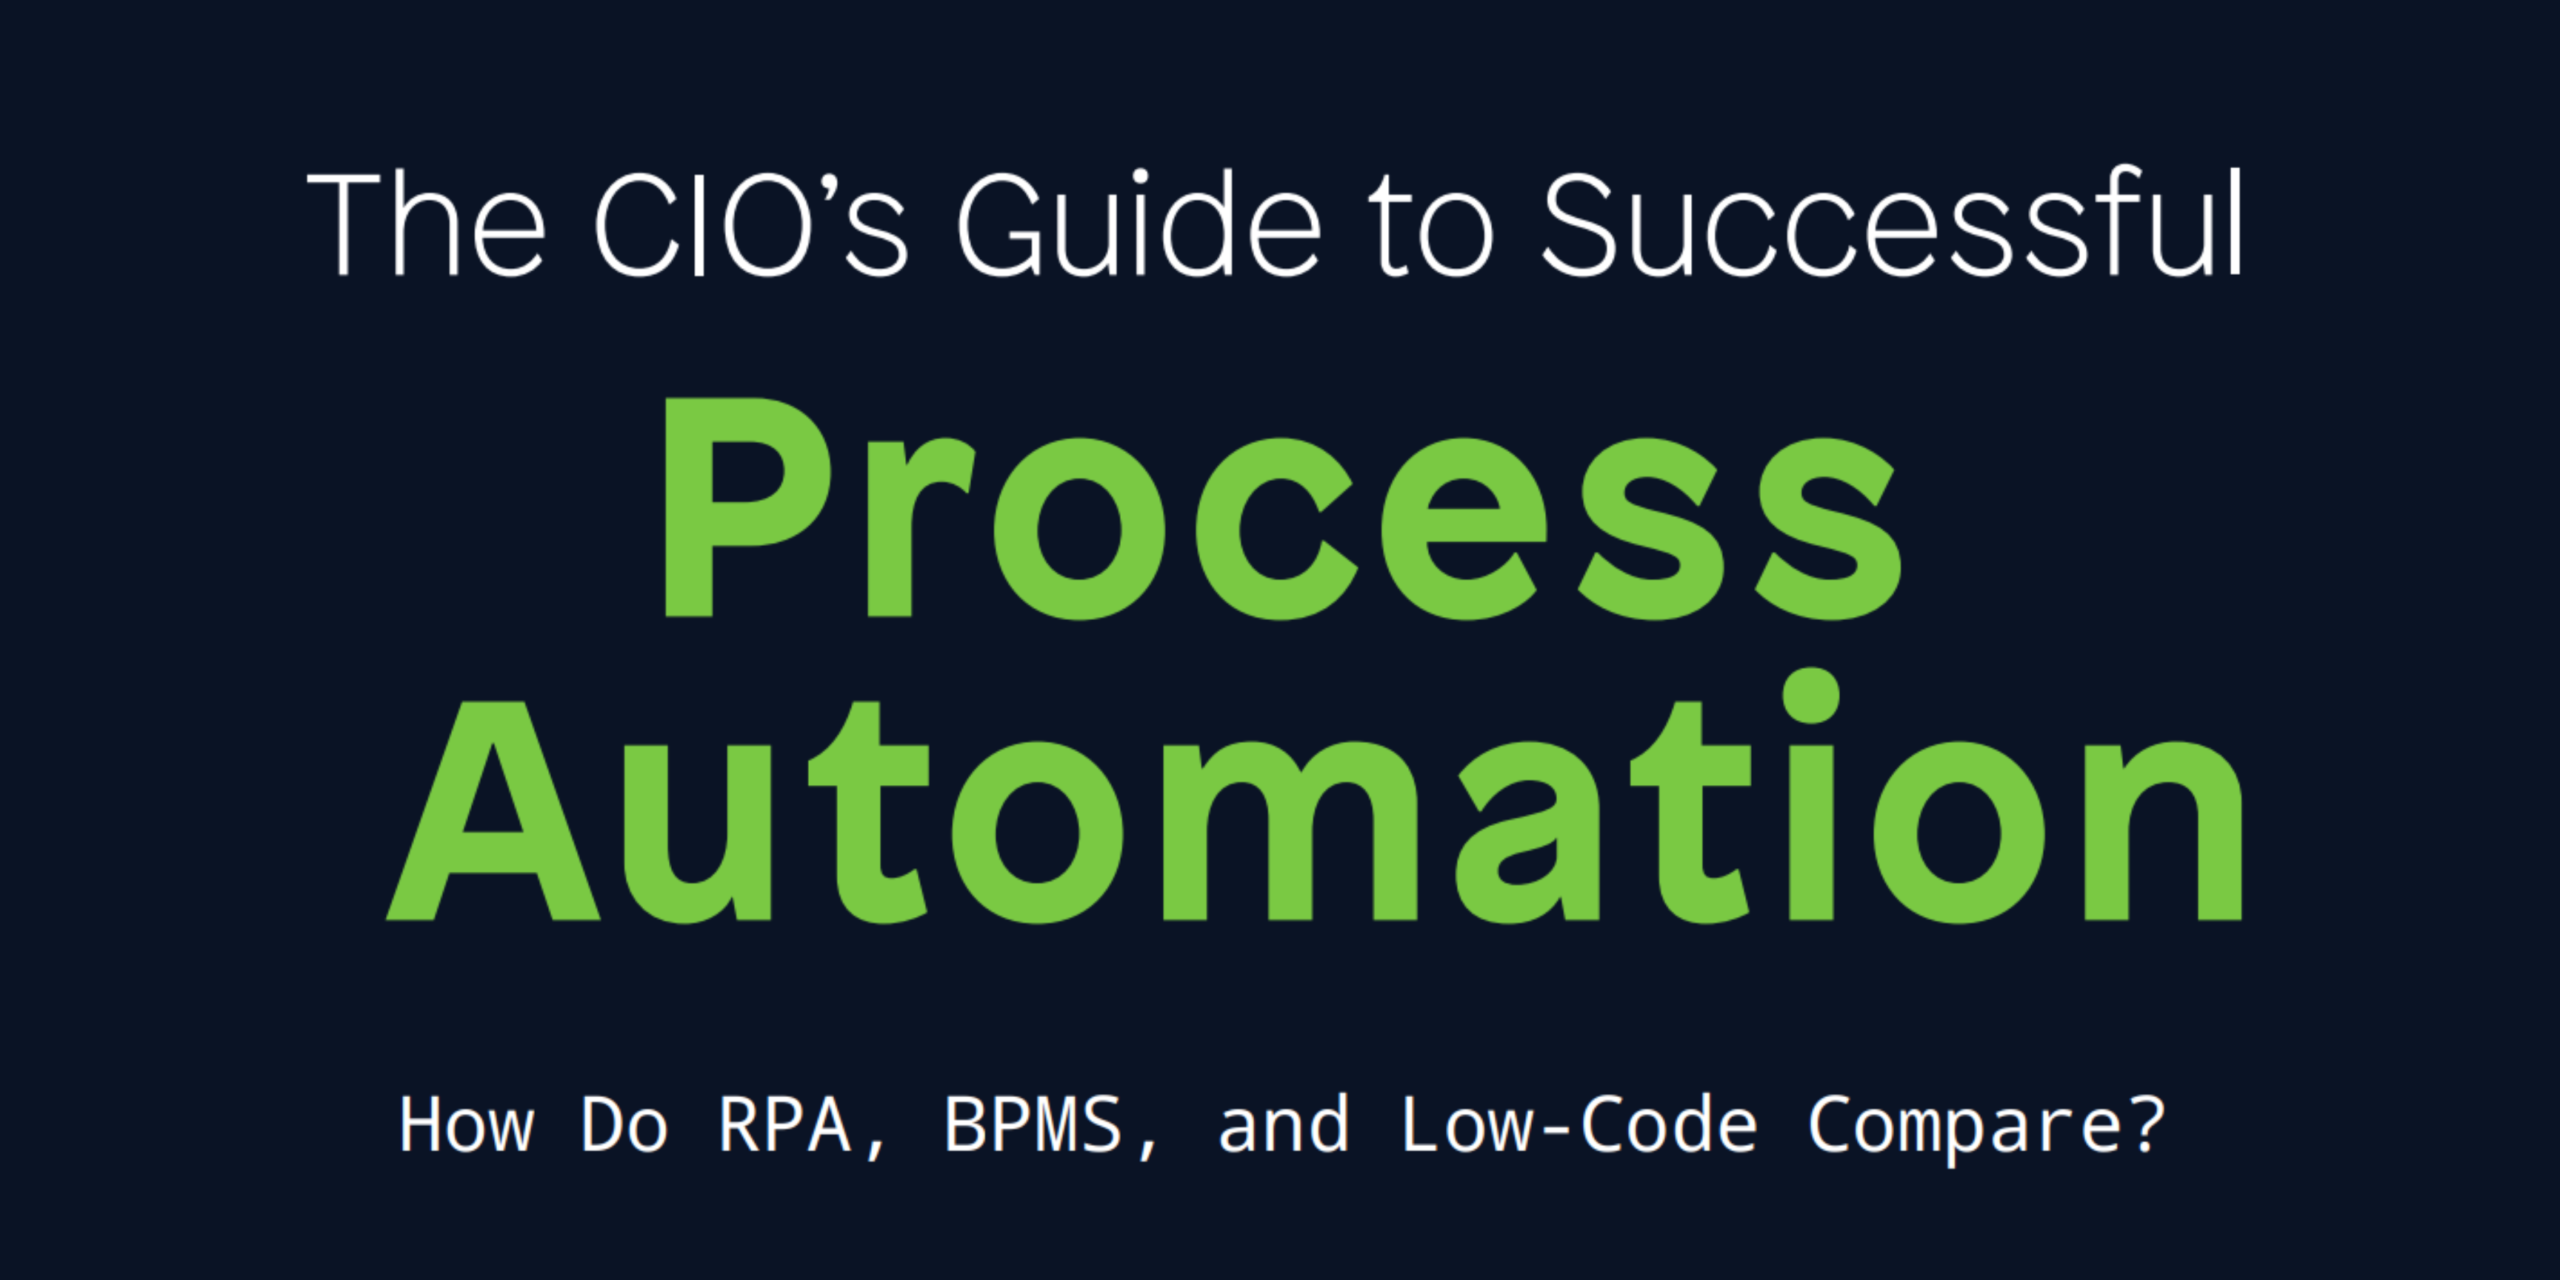 The CIO's Guide to Successful Process Automation